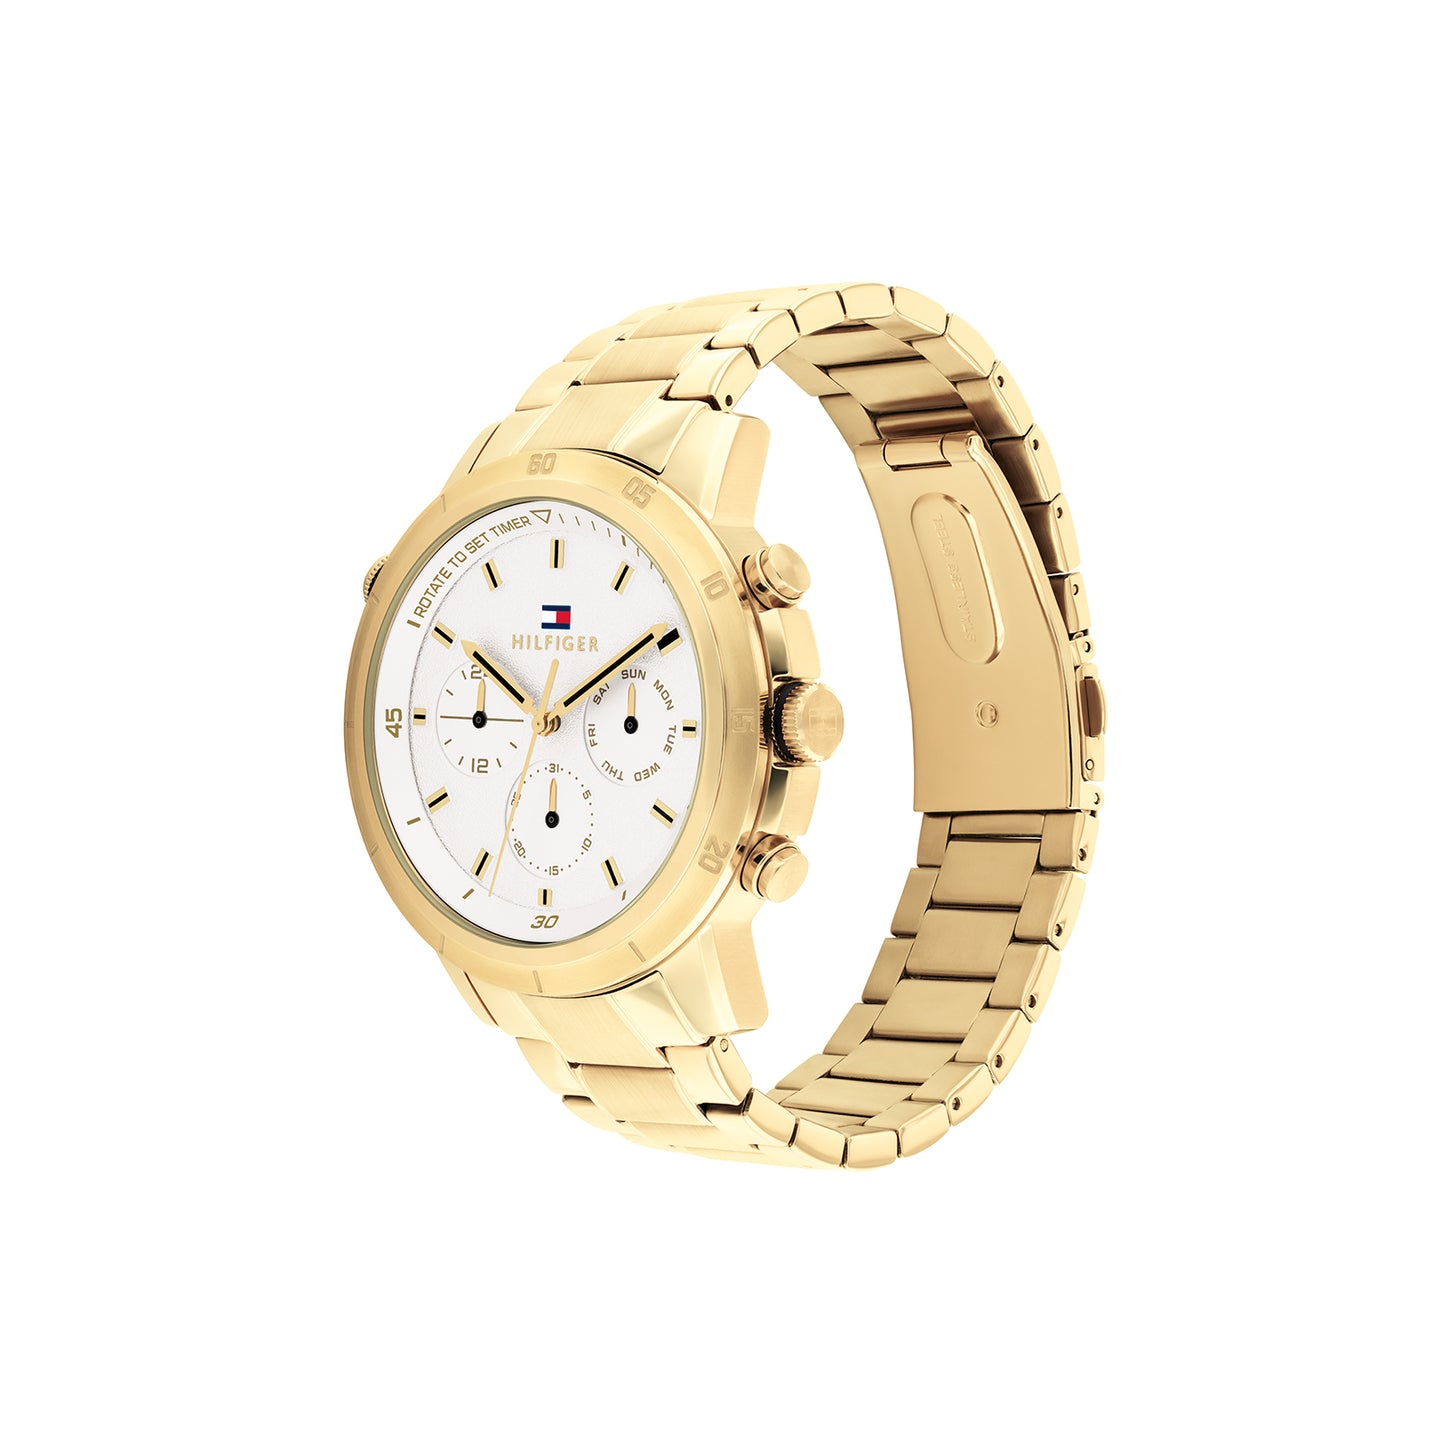 Tommy Hilfiger 1792127 Men's Ionic Thin Gold Plated Steel Watch